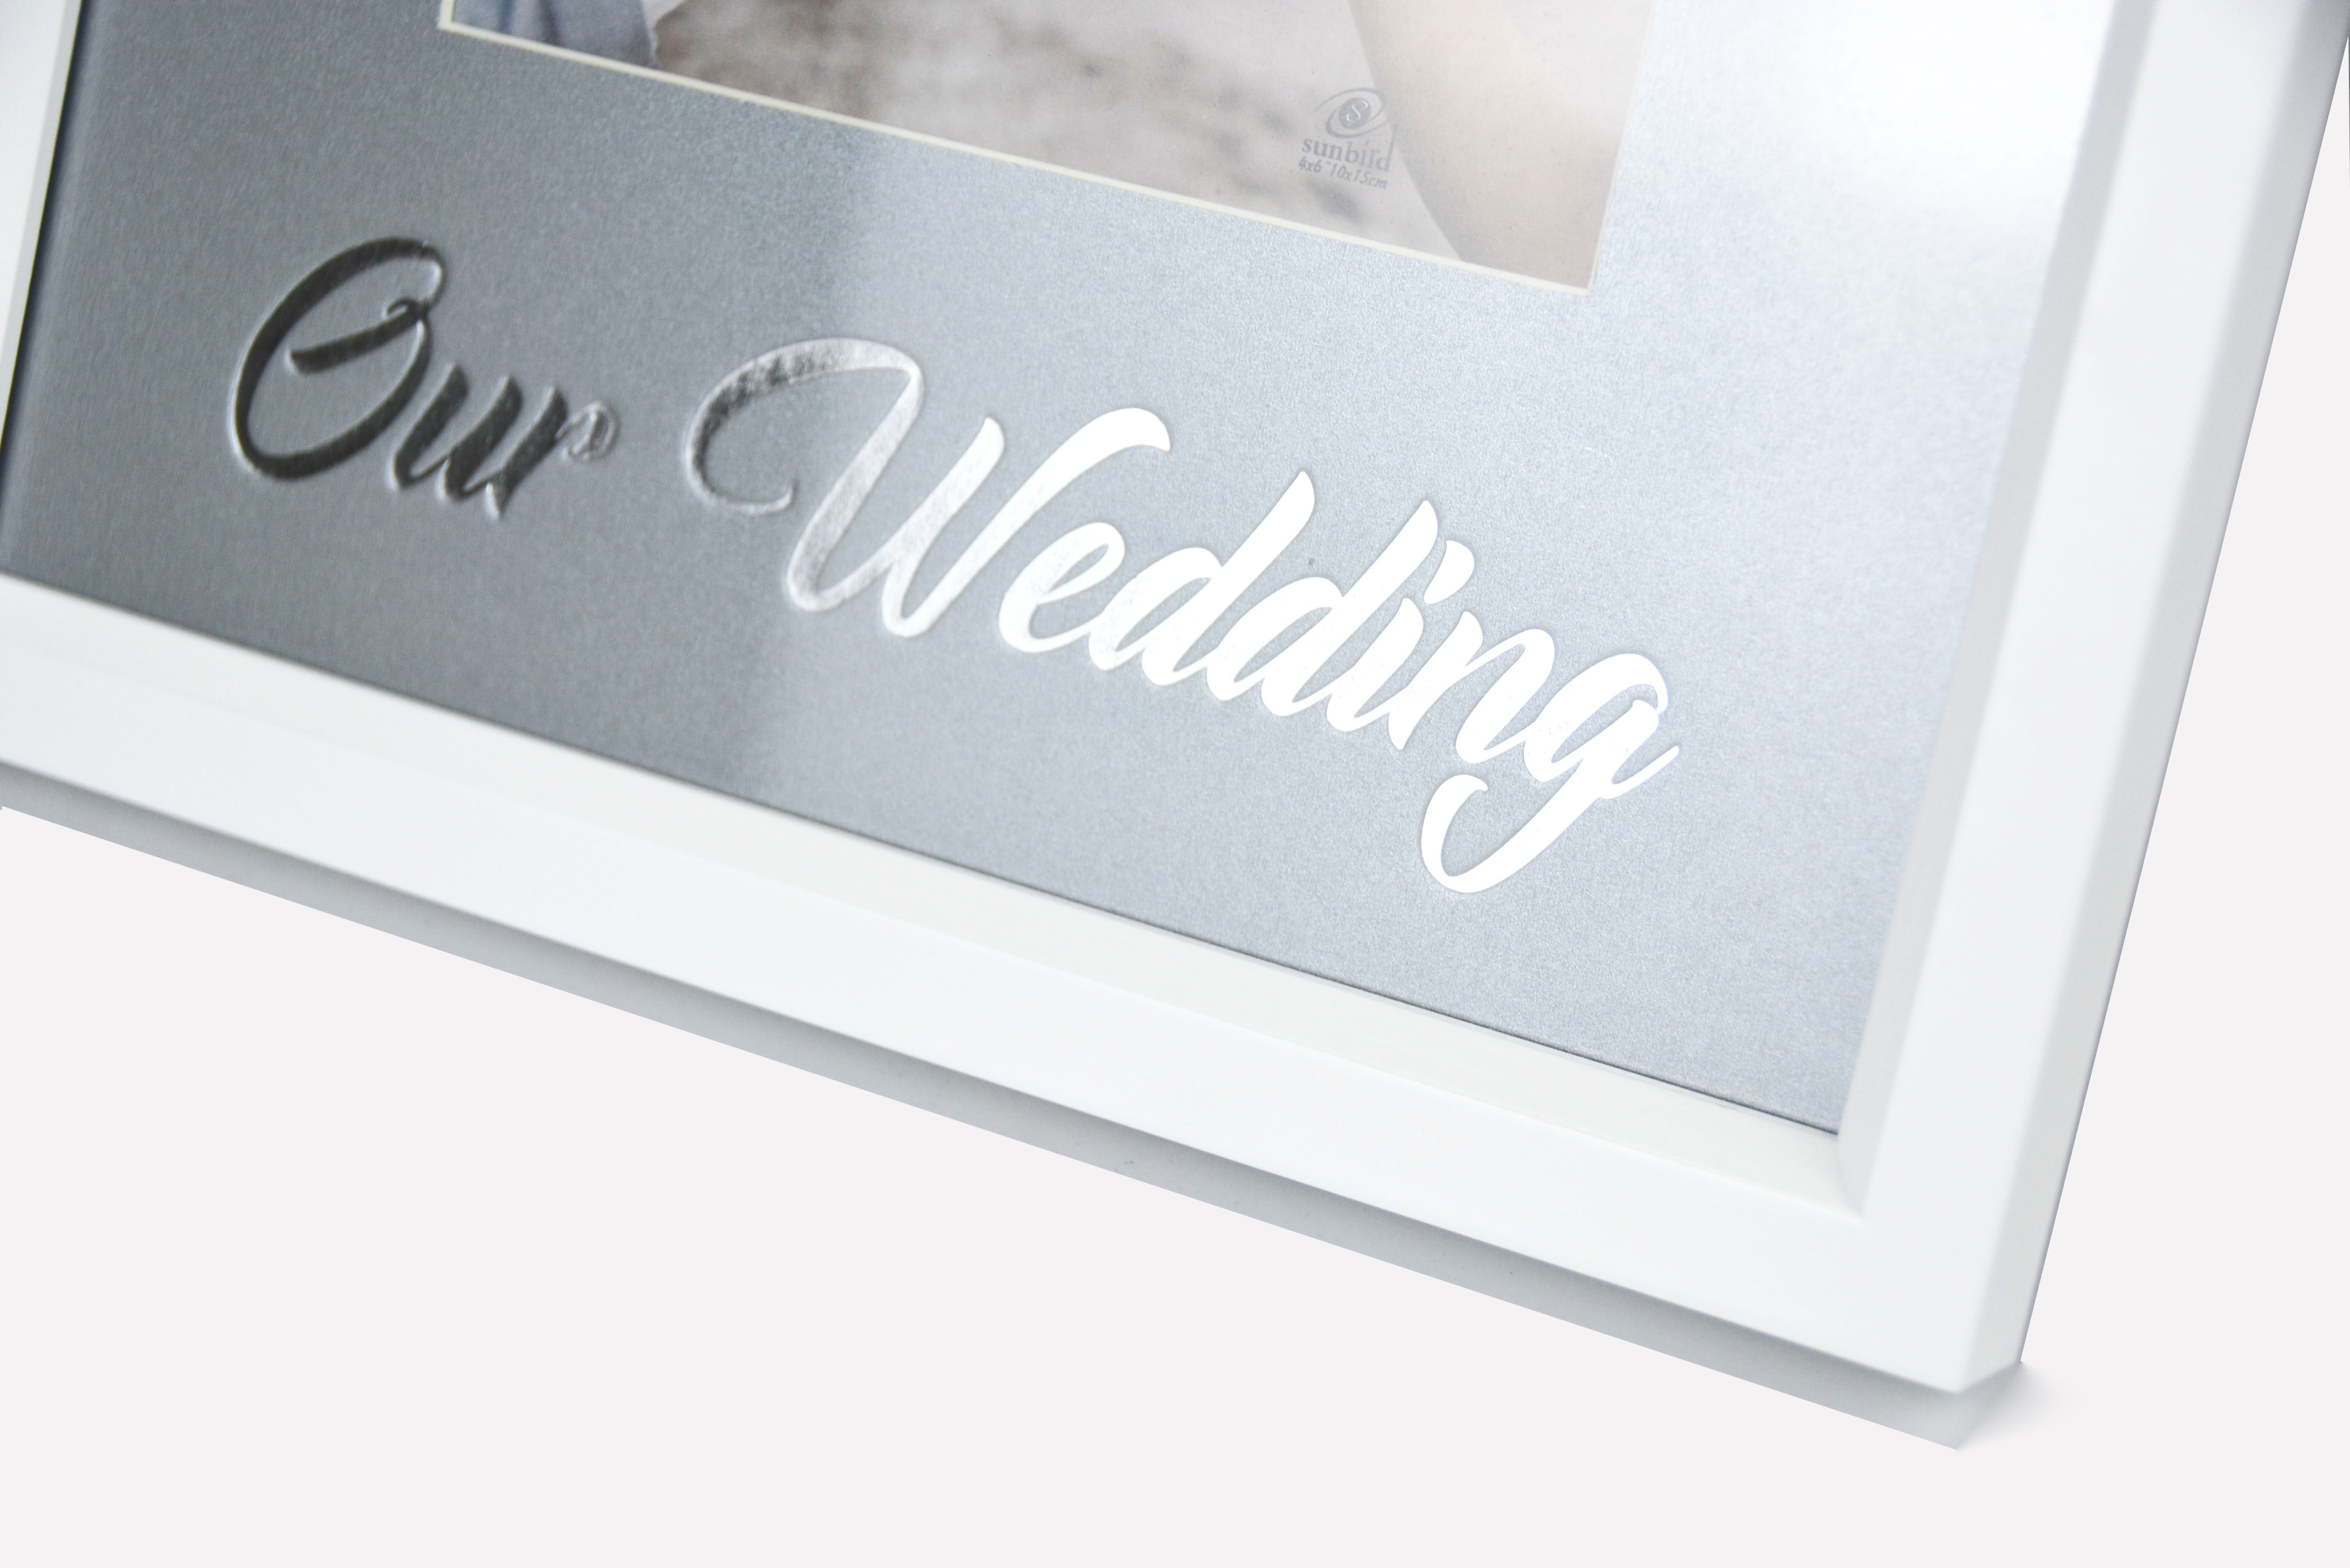 Our wedding 4x6" wooden photo frame with foil silver fonts celebrities